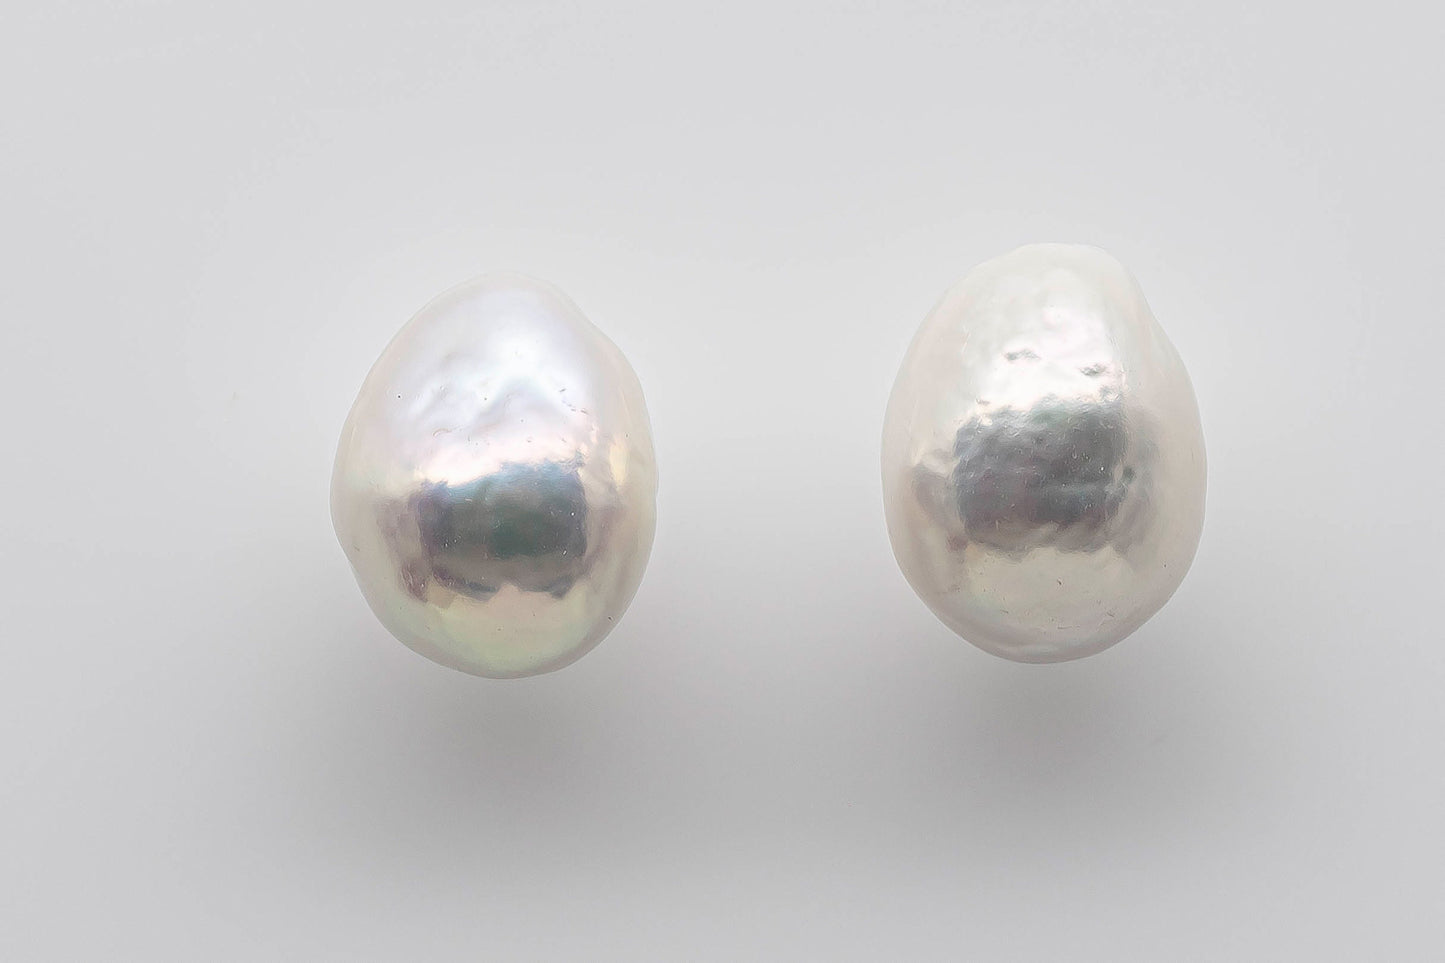 10-12mm Freshwater Edison Pearl Loose Pair Undrilled with Limited Blemishes and High Luster for Making Earring, SKU # 1358EP